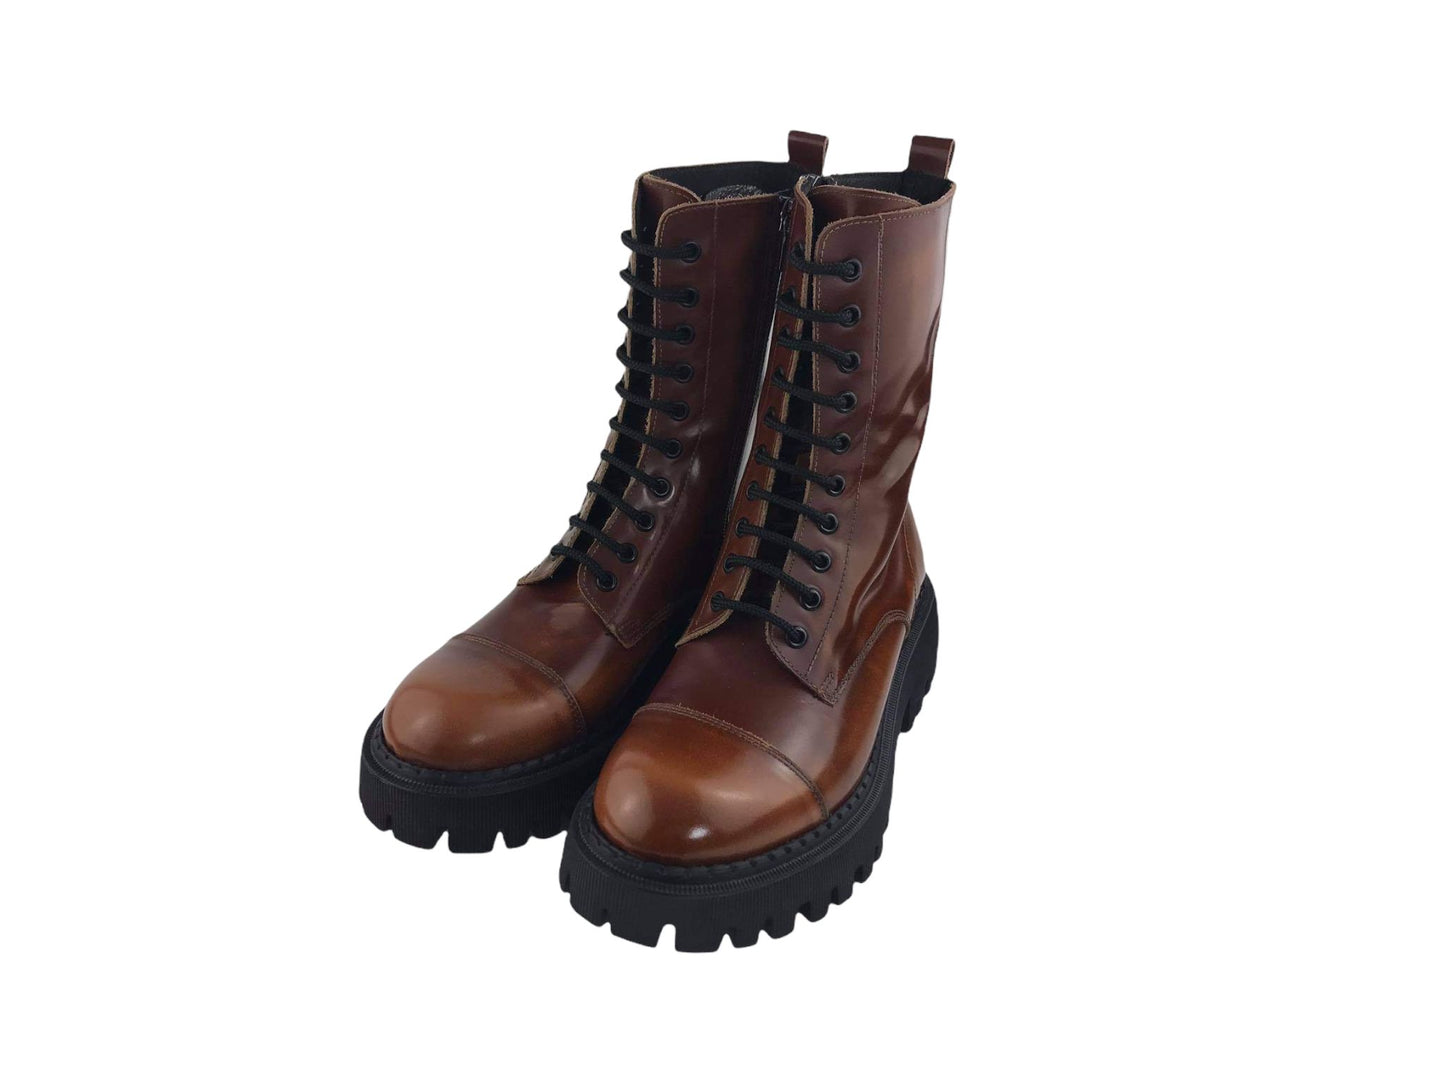 marnate | Women's Zareb military boots in hazelnut waxed leather